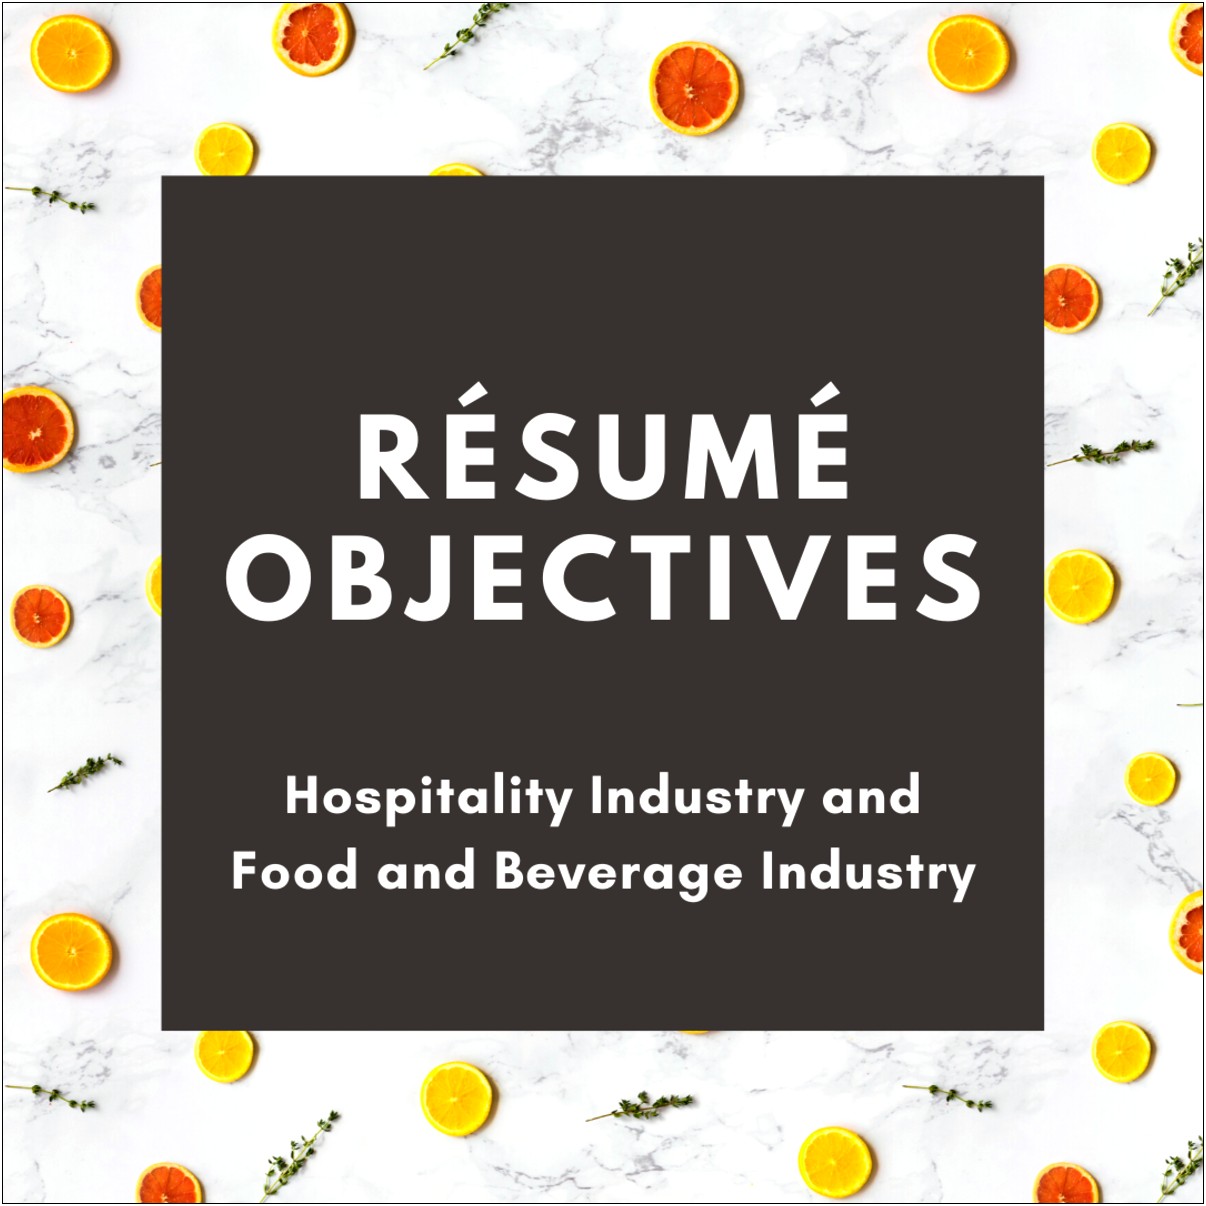 Reasons To Not Put Objective On Resume